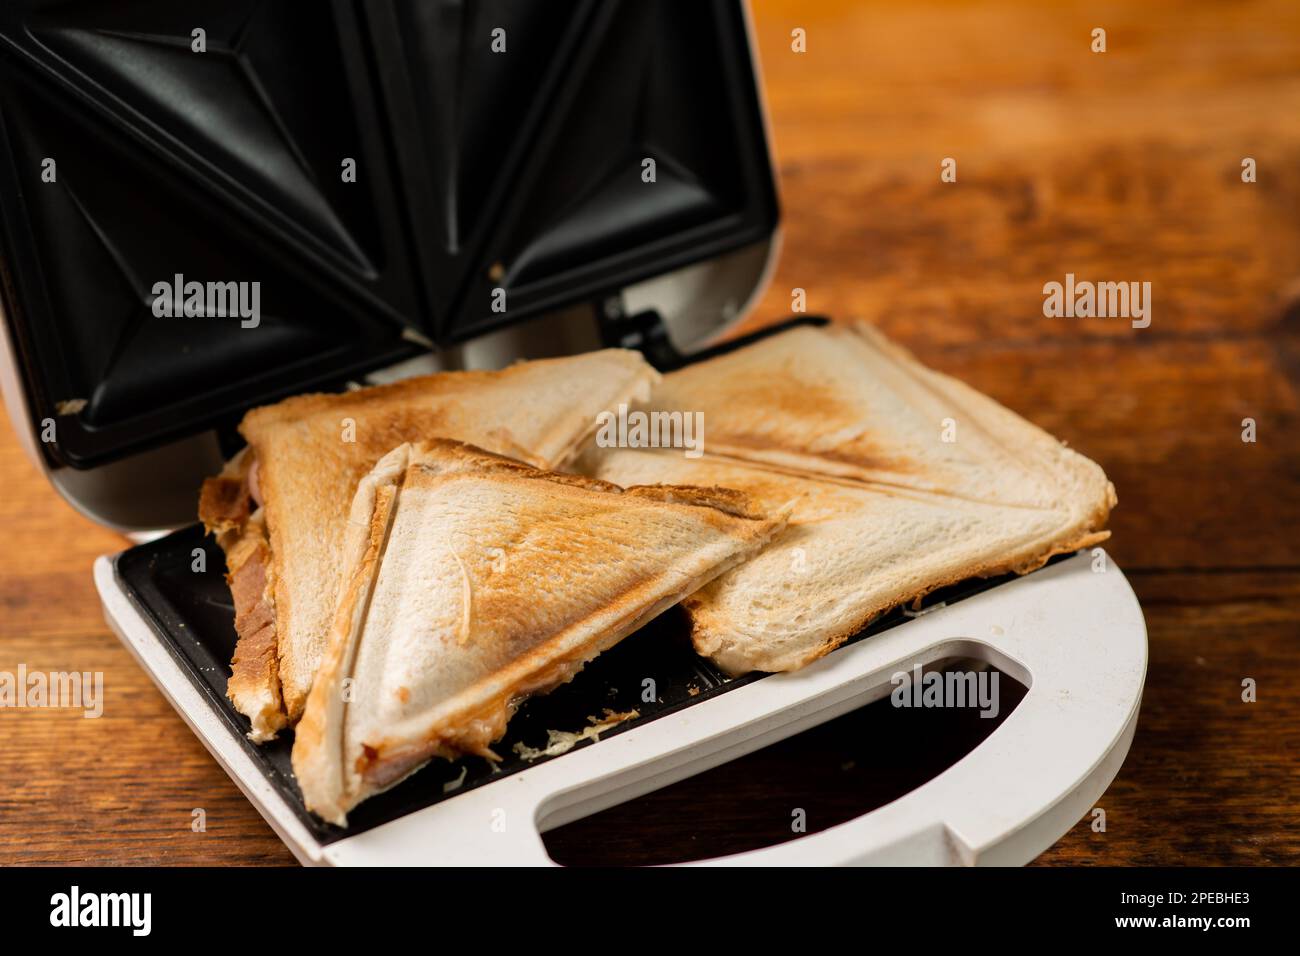 https://c8.alamy.com/comp/2PEBHE3/freshly-made-toasted-sandwiches-in-a-sandwich-maker-on-a-wooden-background-toasted-triangular-sandwiches-with-cheese-2PEBHE3.jpg